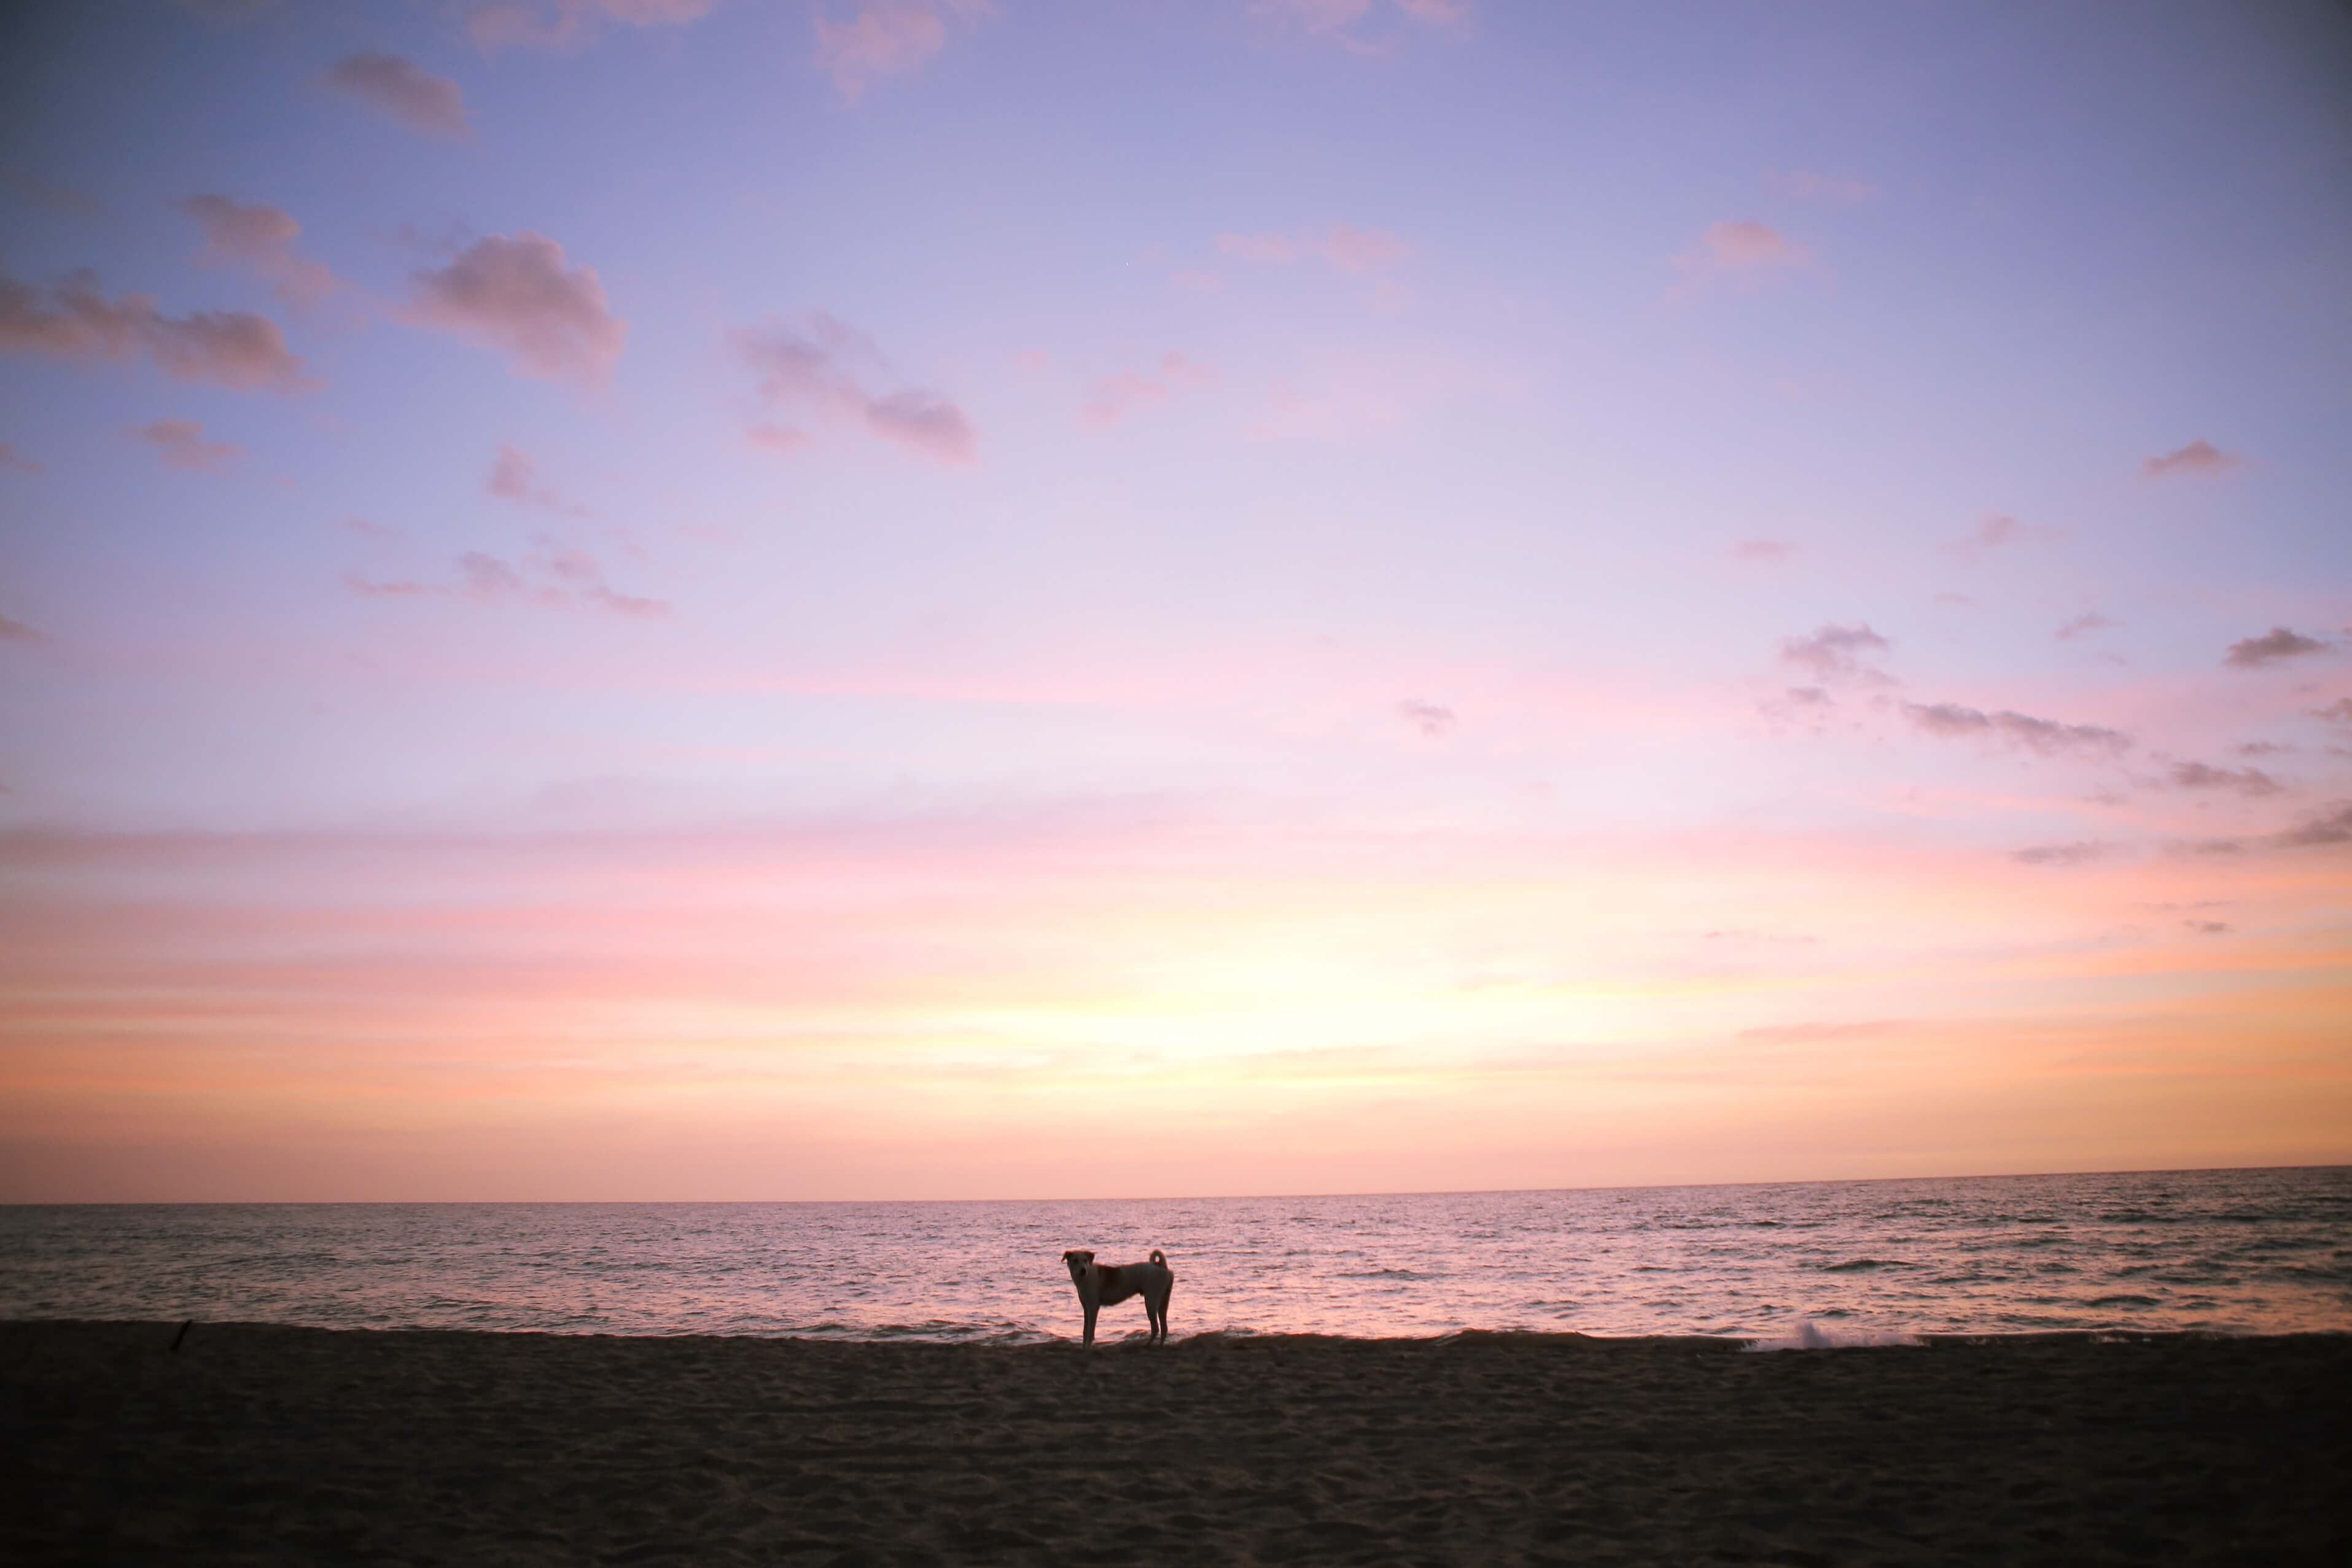 The silhouette of a dog is seen against a pink and purple sky as the sun sets on the beach.